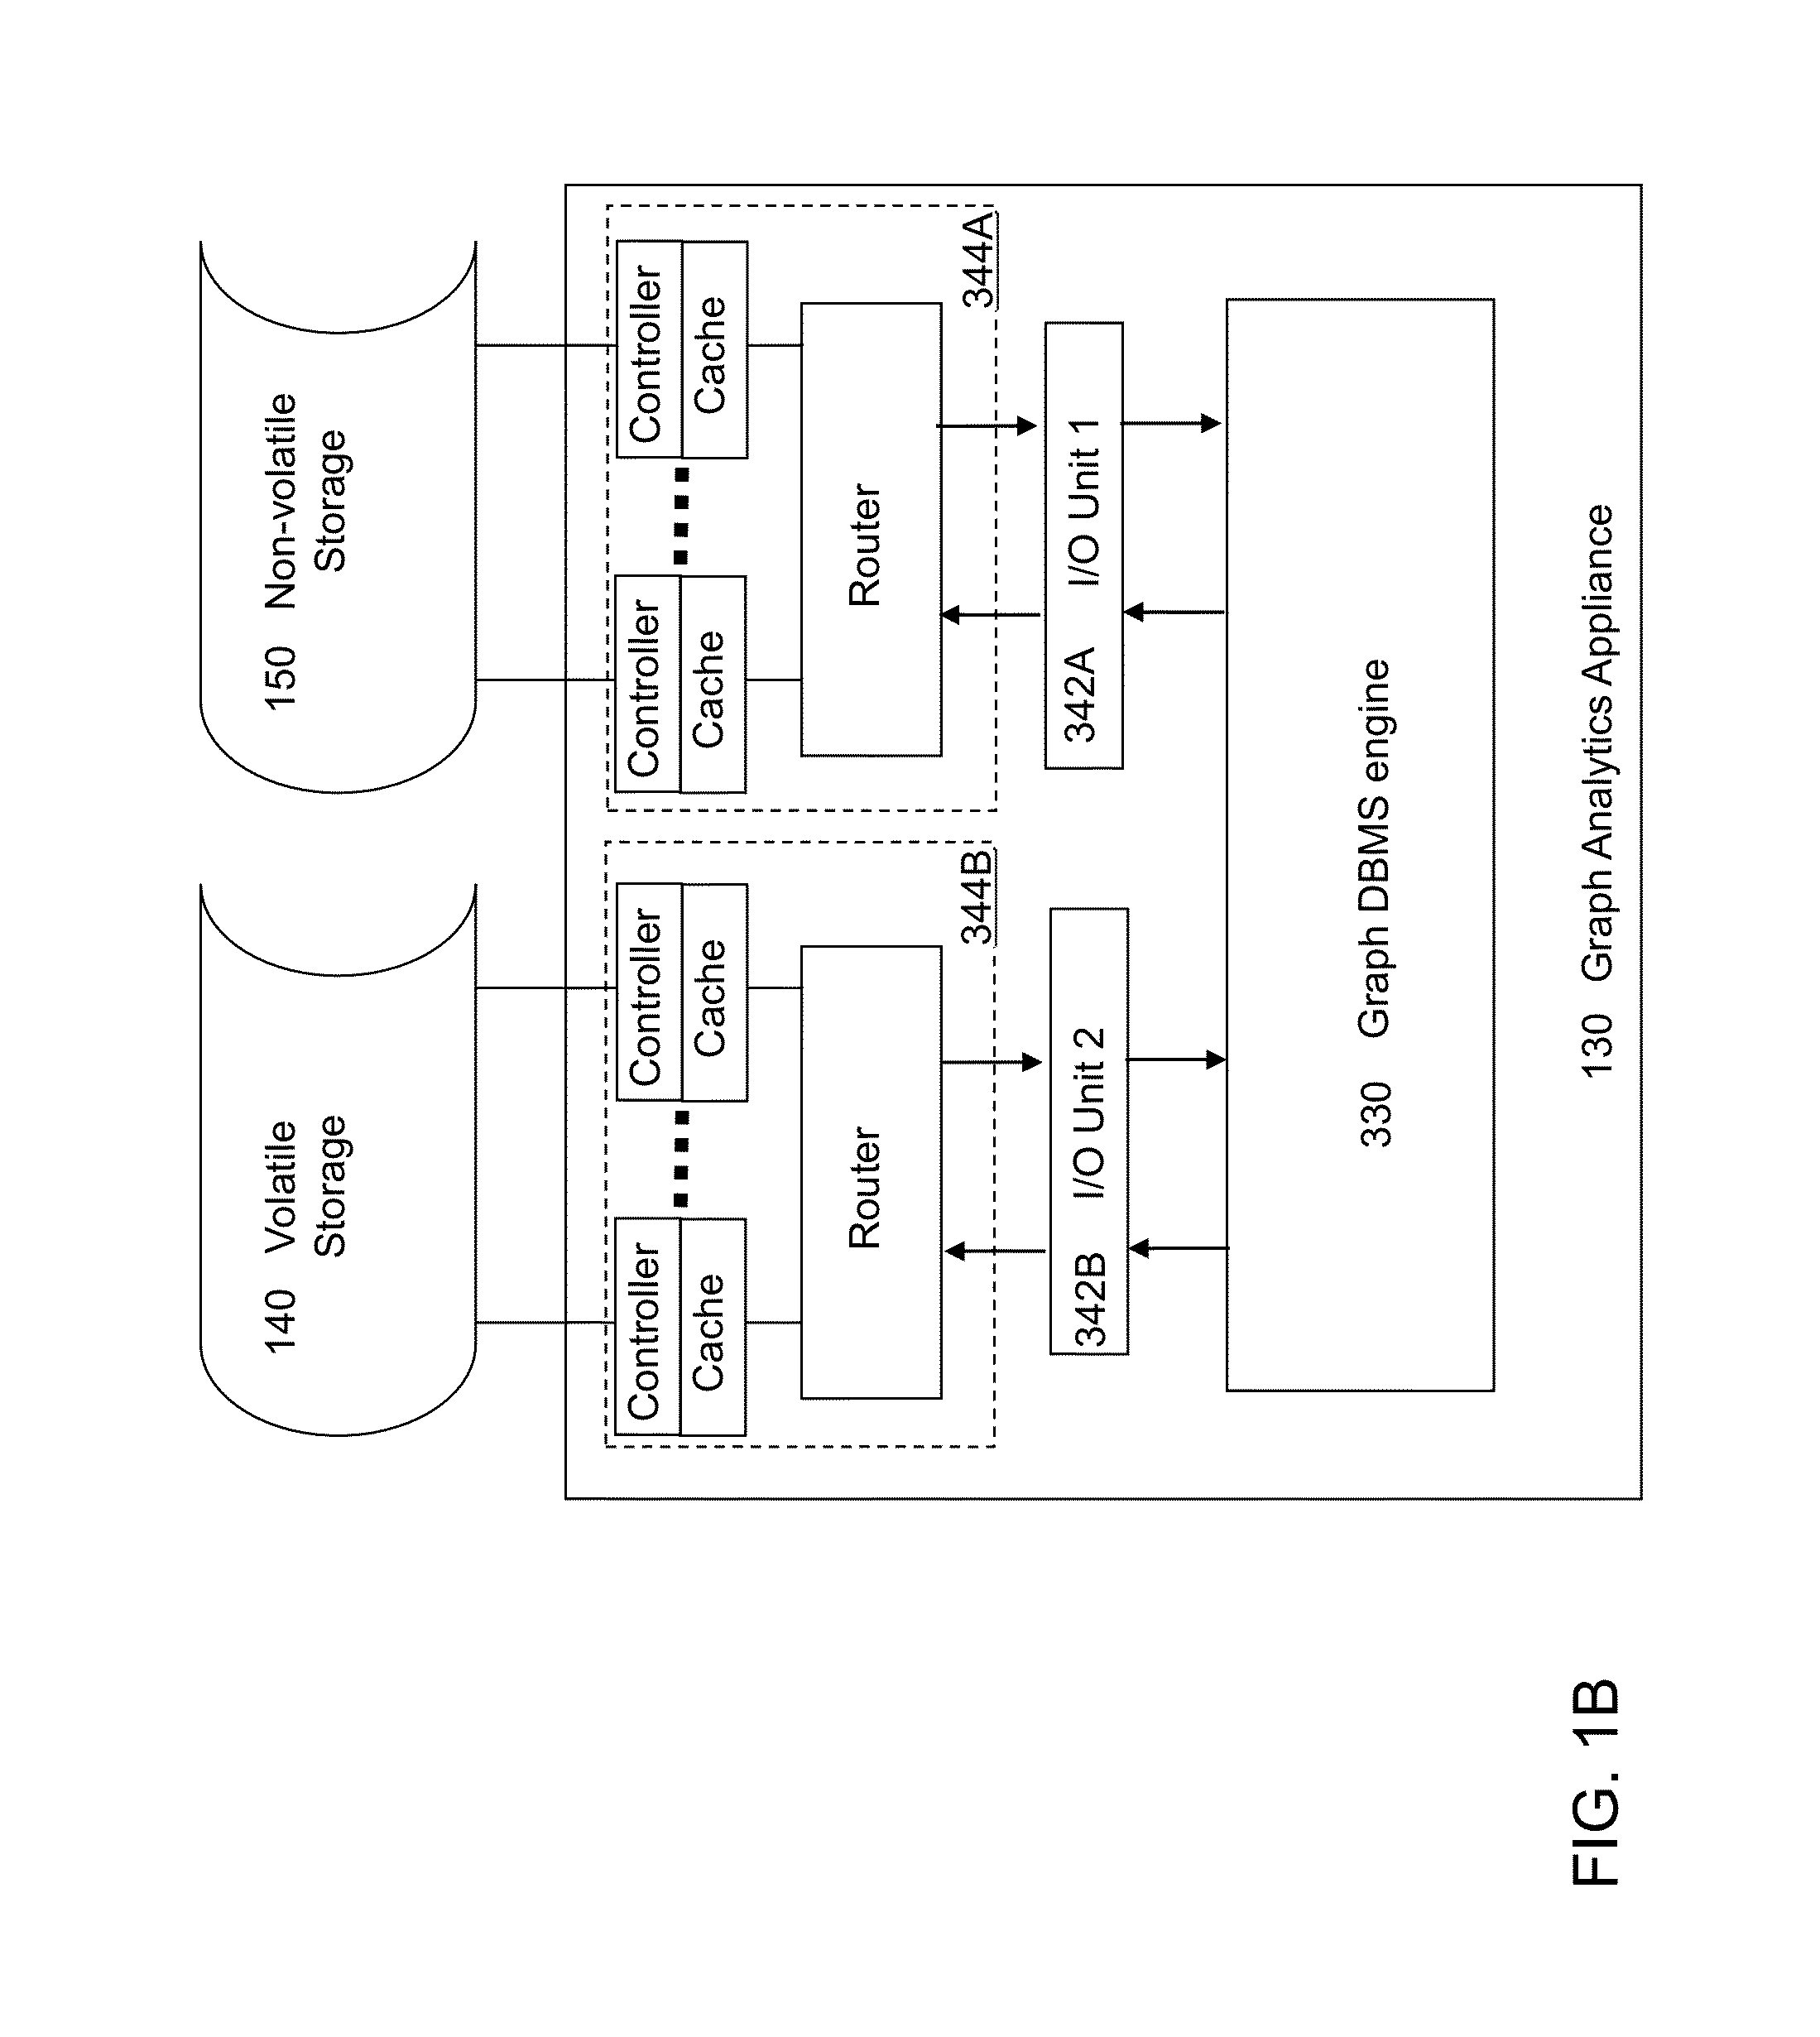 Method and apparatus for efficient execution of concurrent processes on a multithreaded message passing system